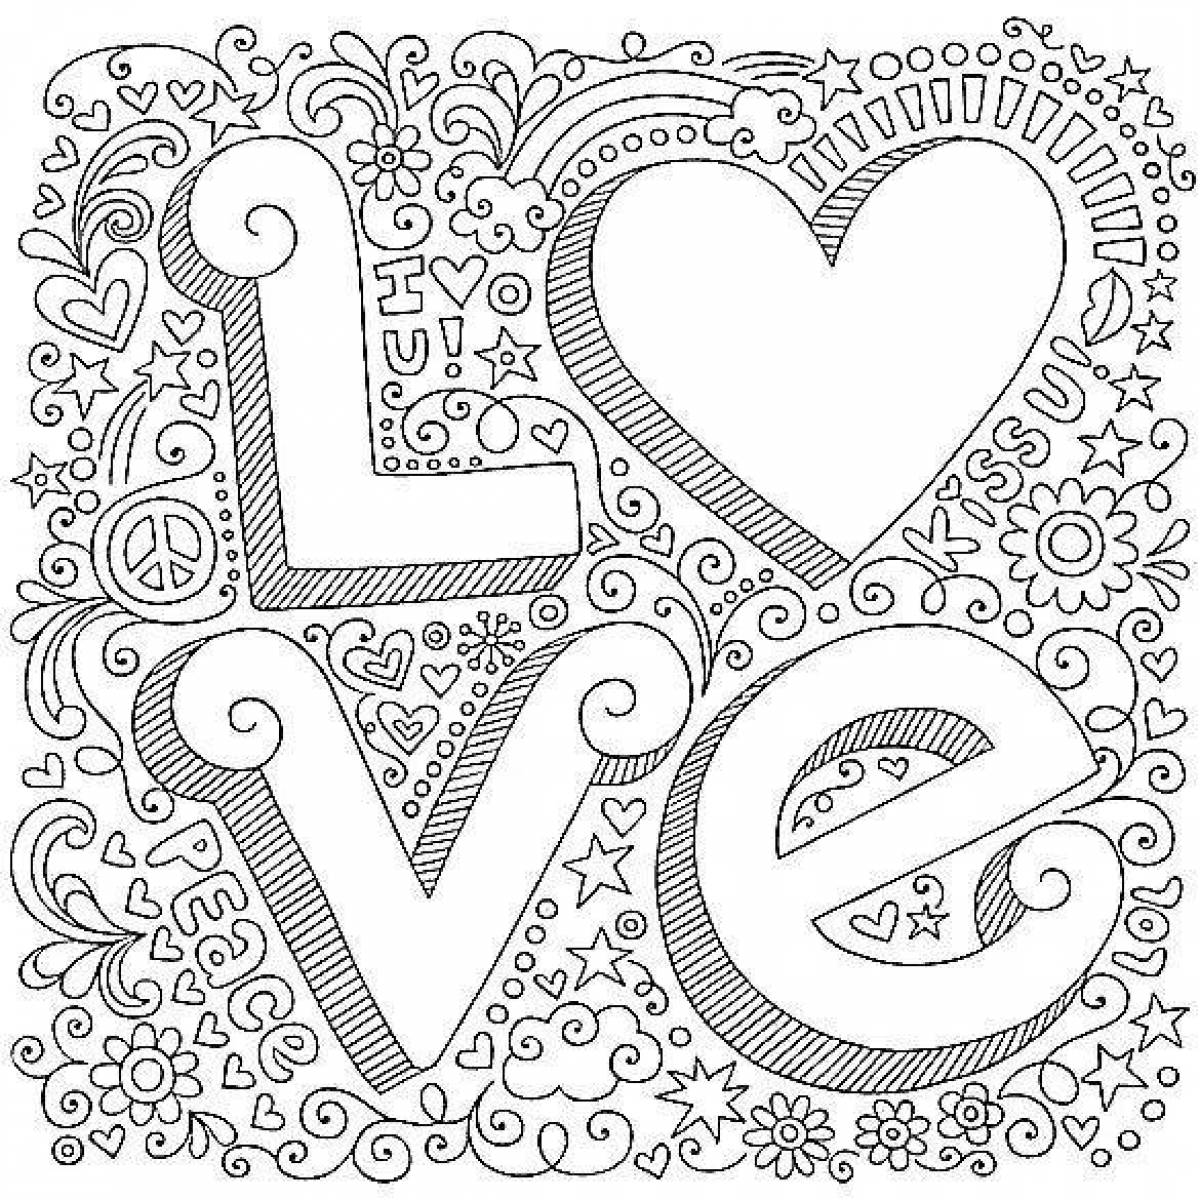 Exquisite coloring page 16